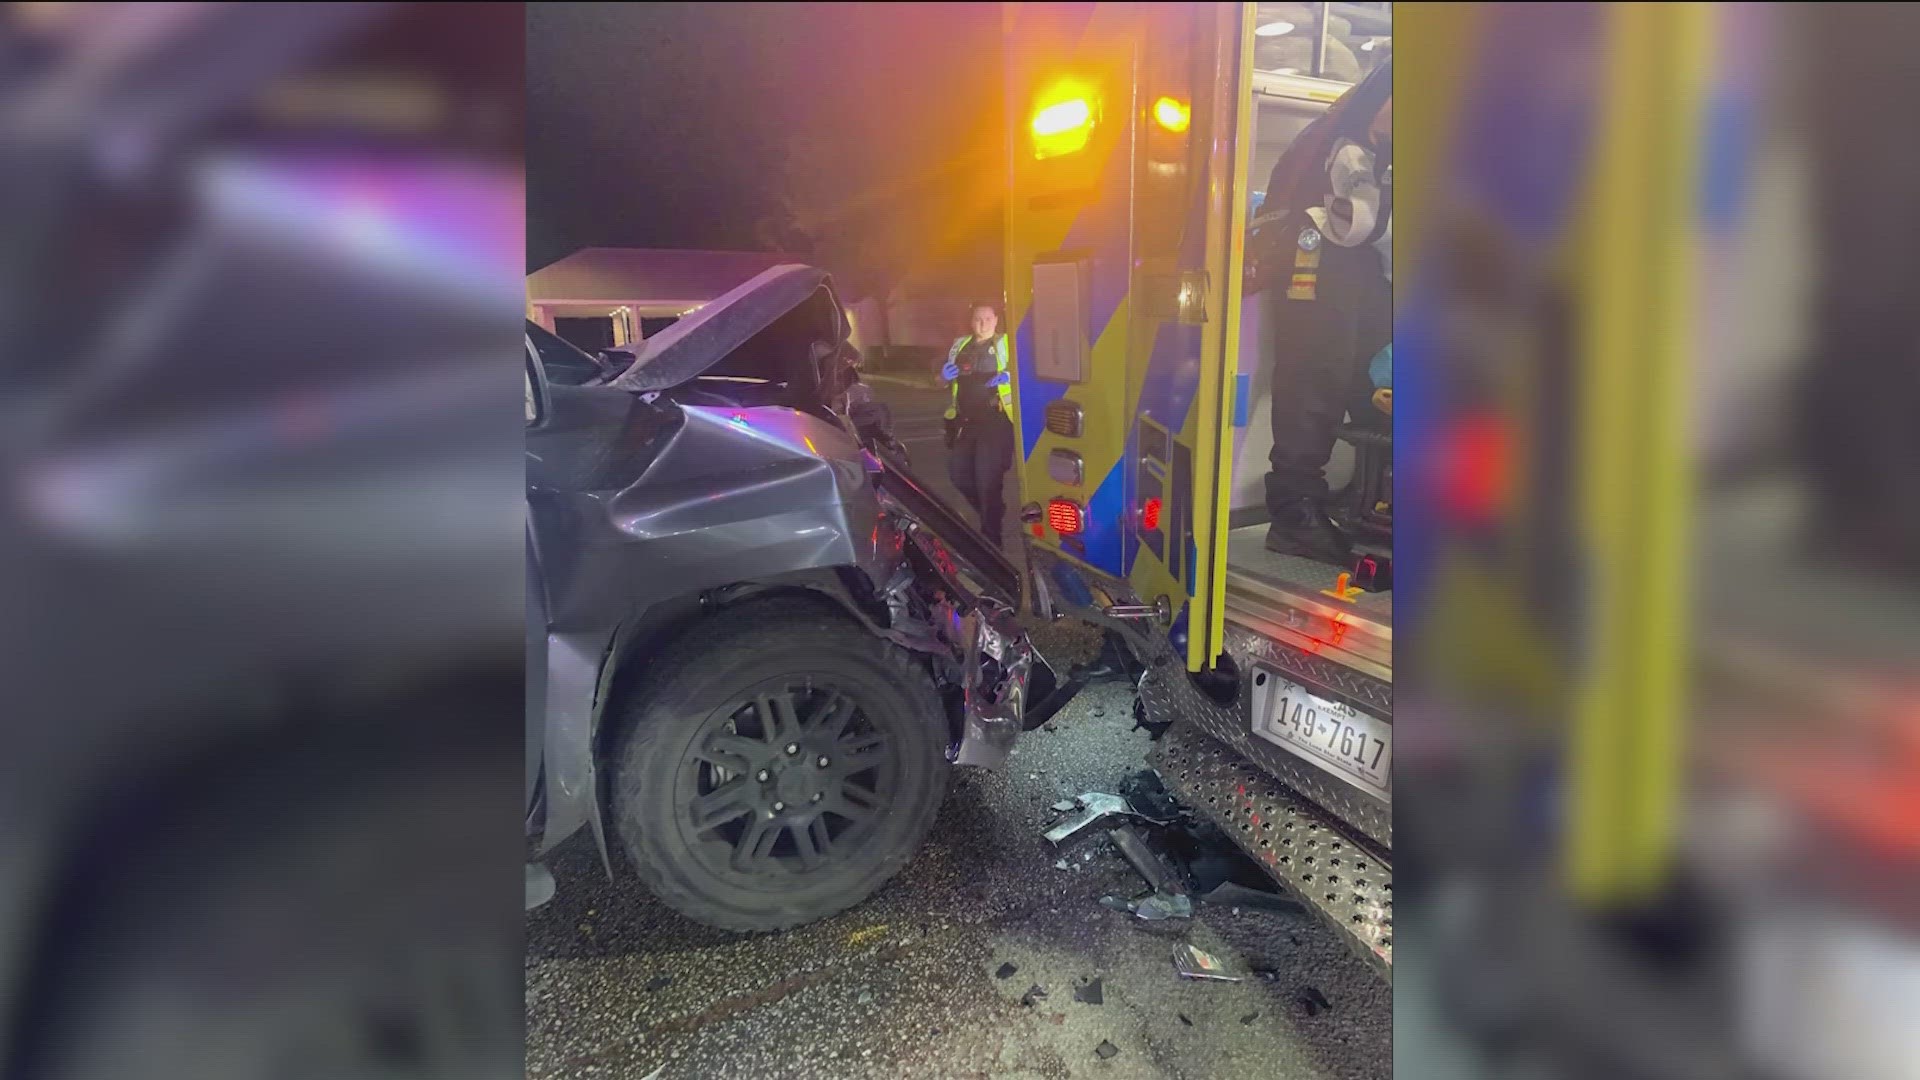 Two local medics had to go to the hospital after they say a drunk driver hit their ambulance over the weekend.